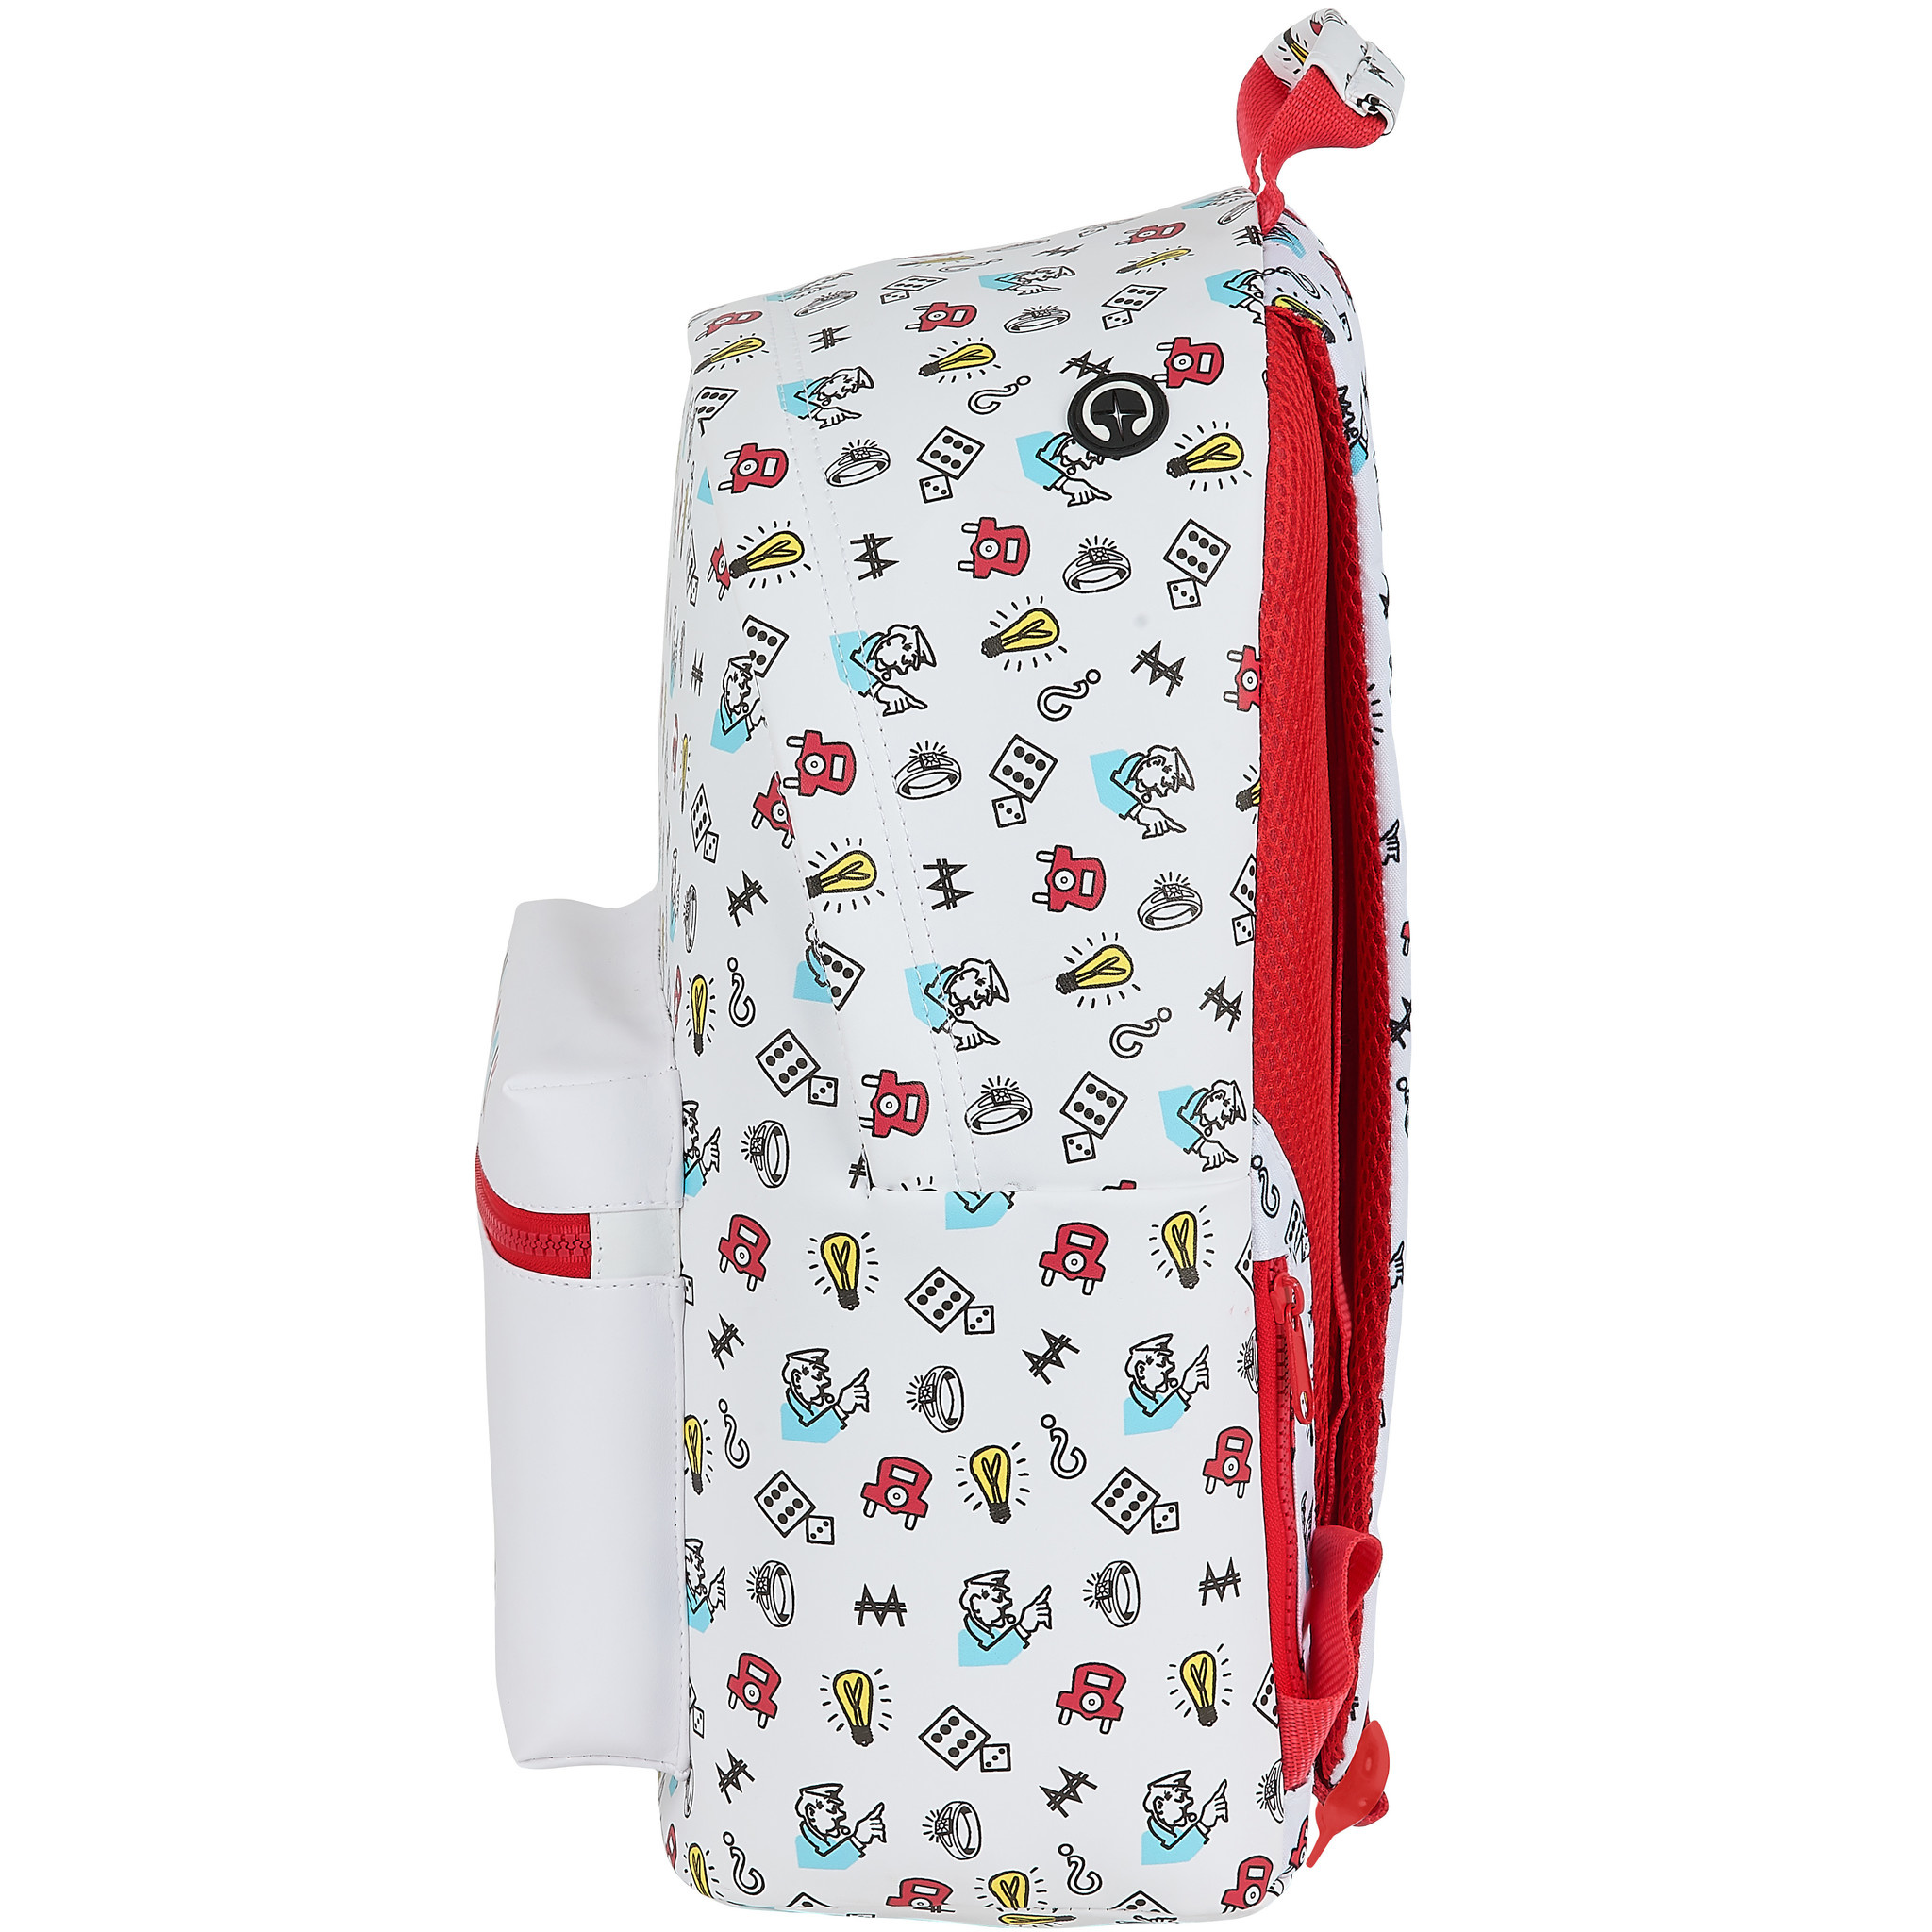 Monopoly Backpack Free Parking - 41 x 31 x 16 cm - White